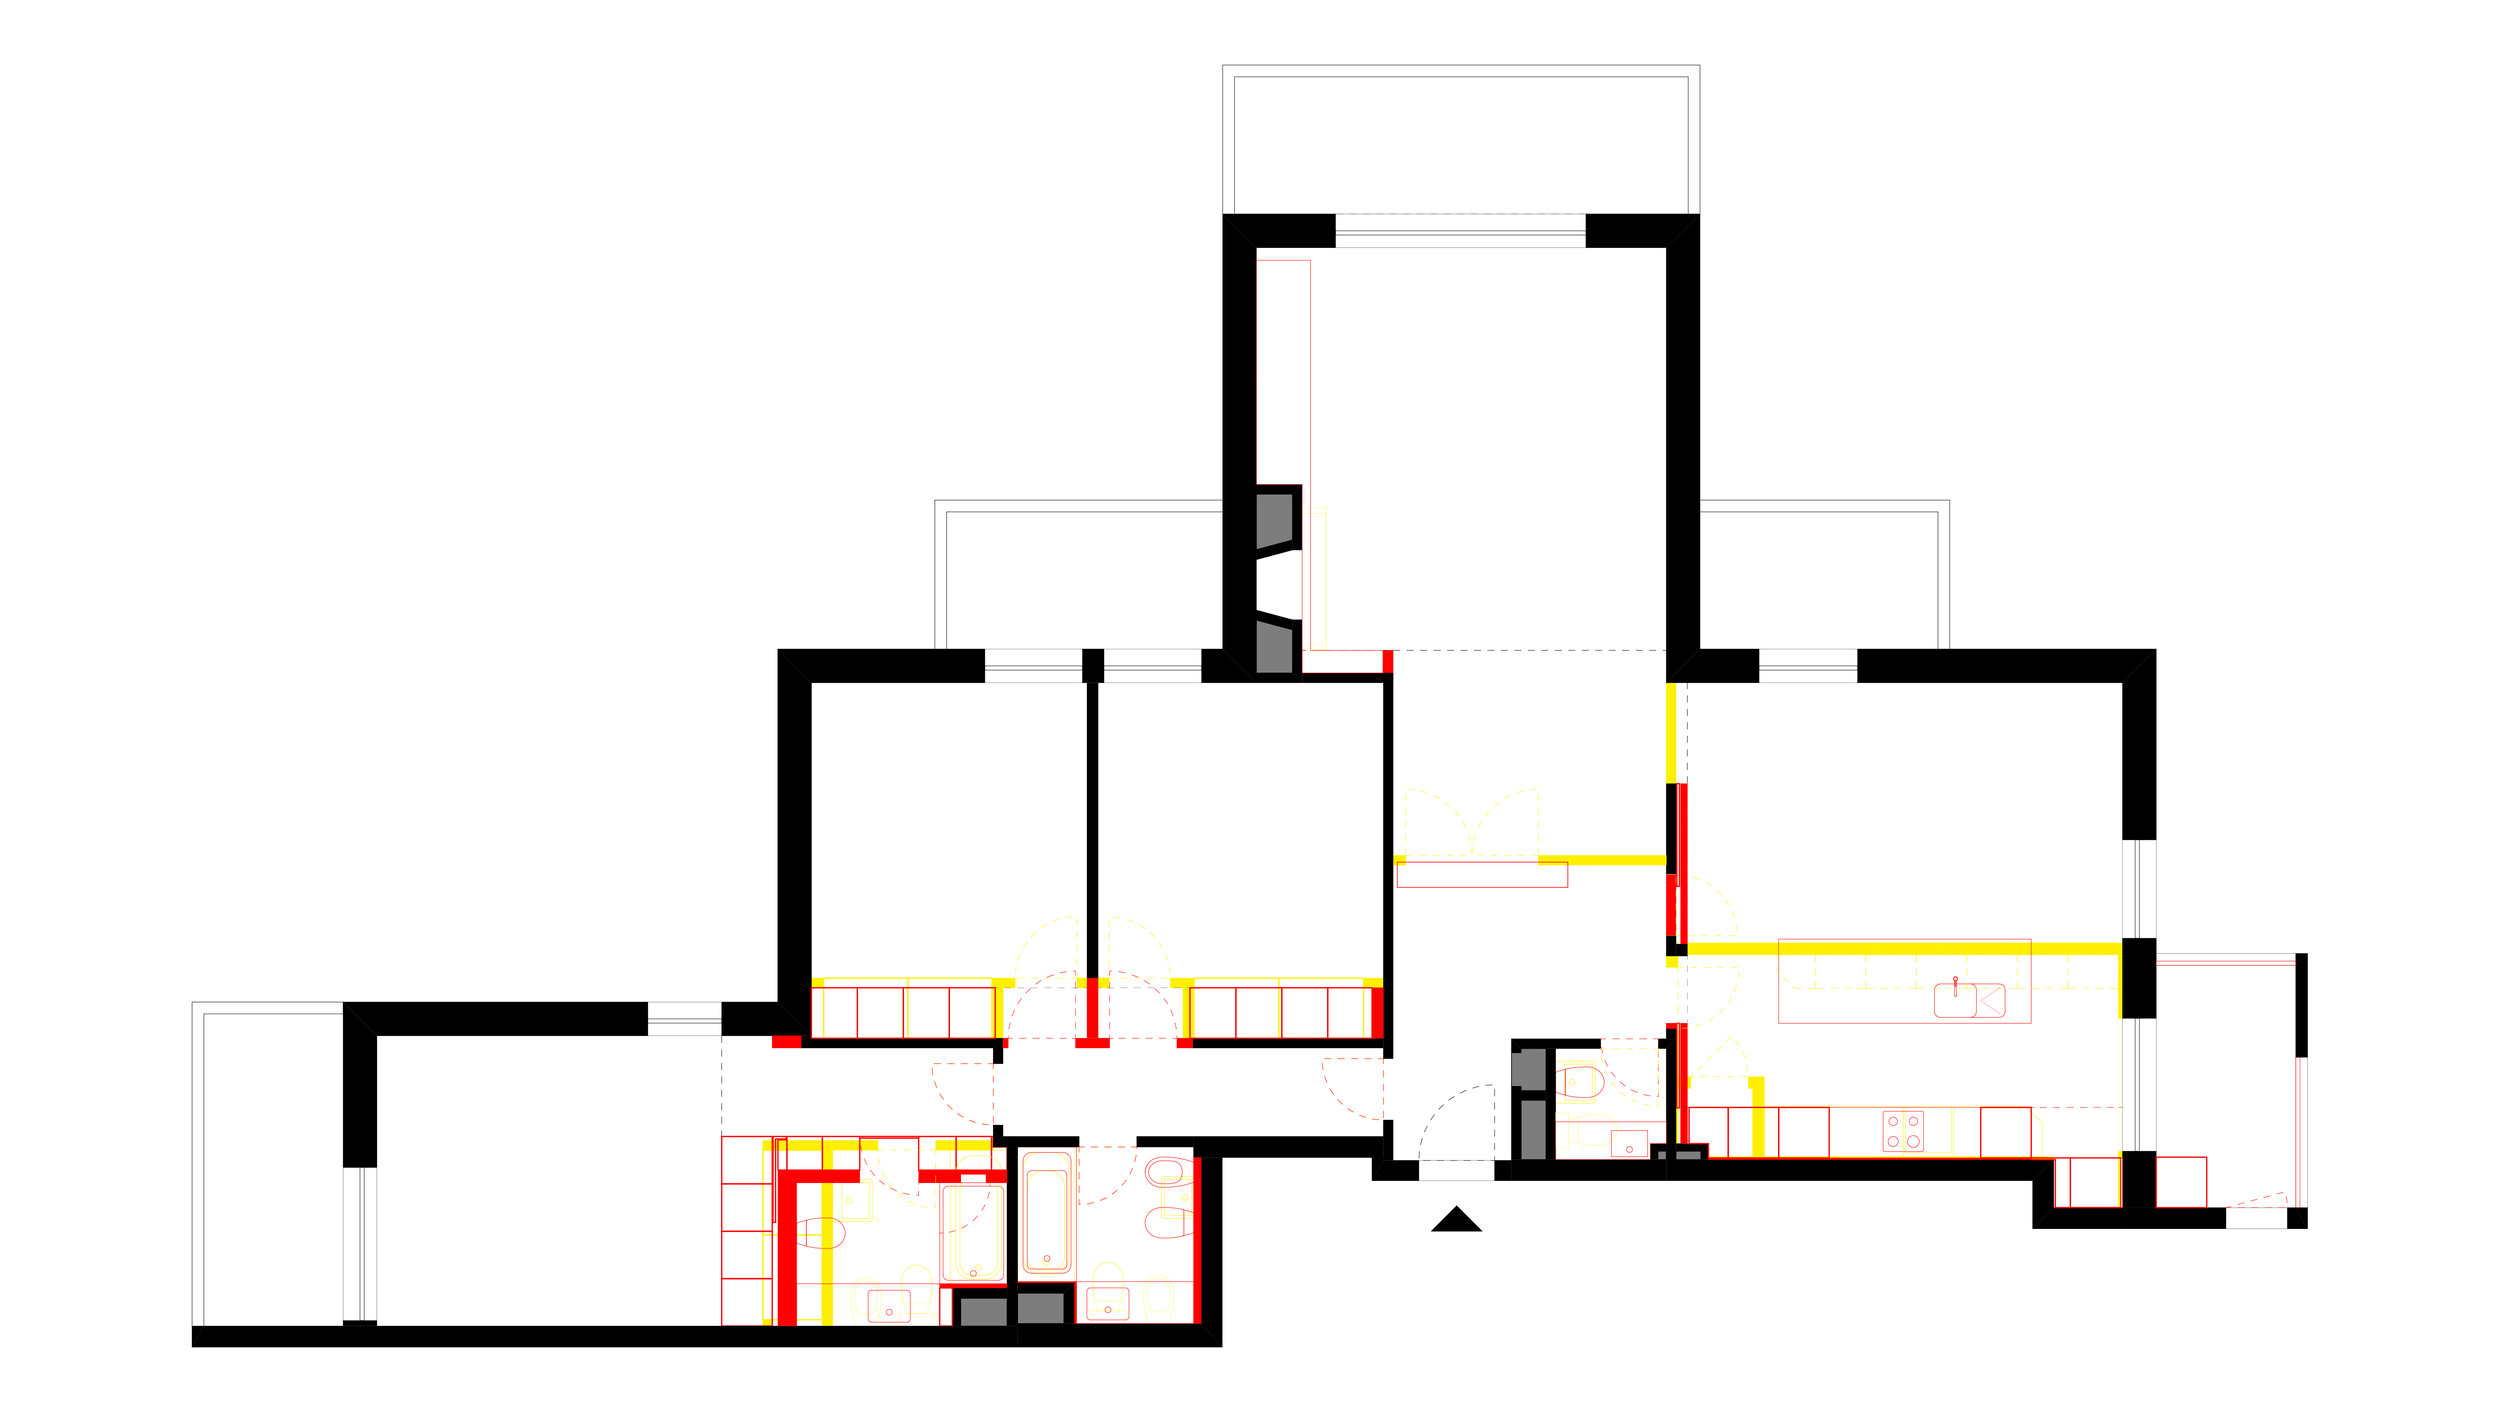 FLOOR PLAN _ Demolition (yellow) and New Construction (red)